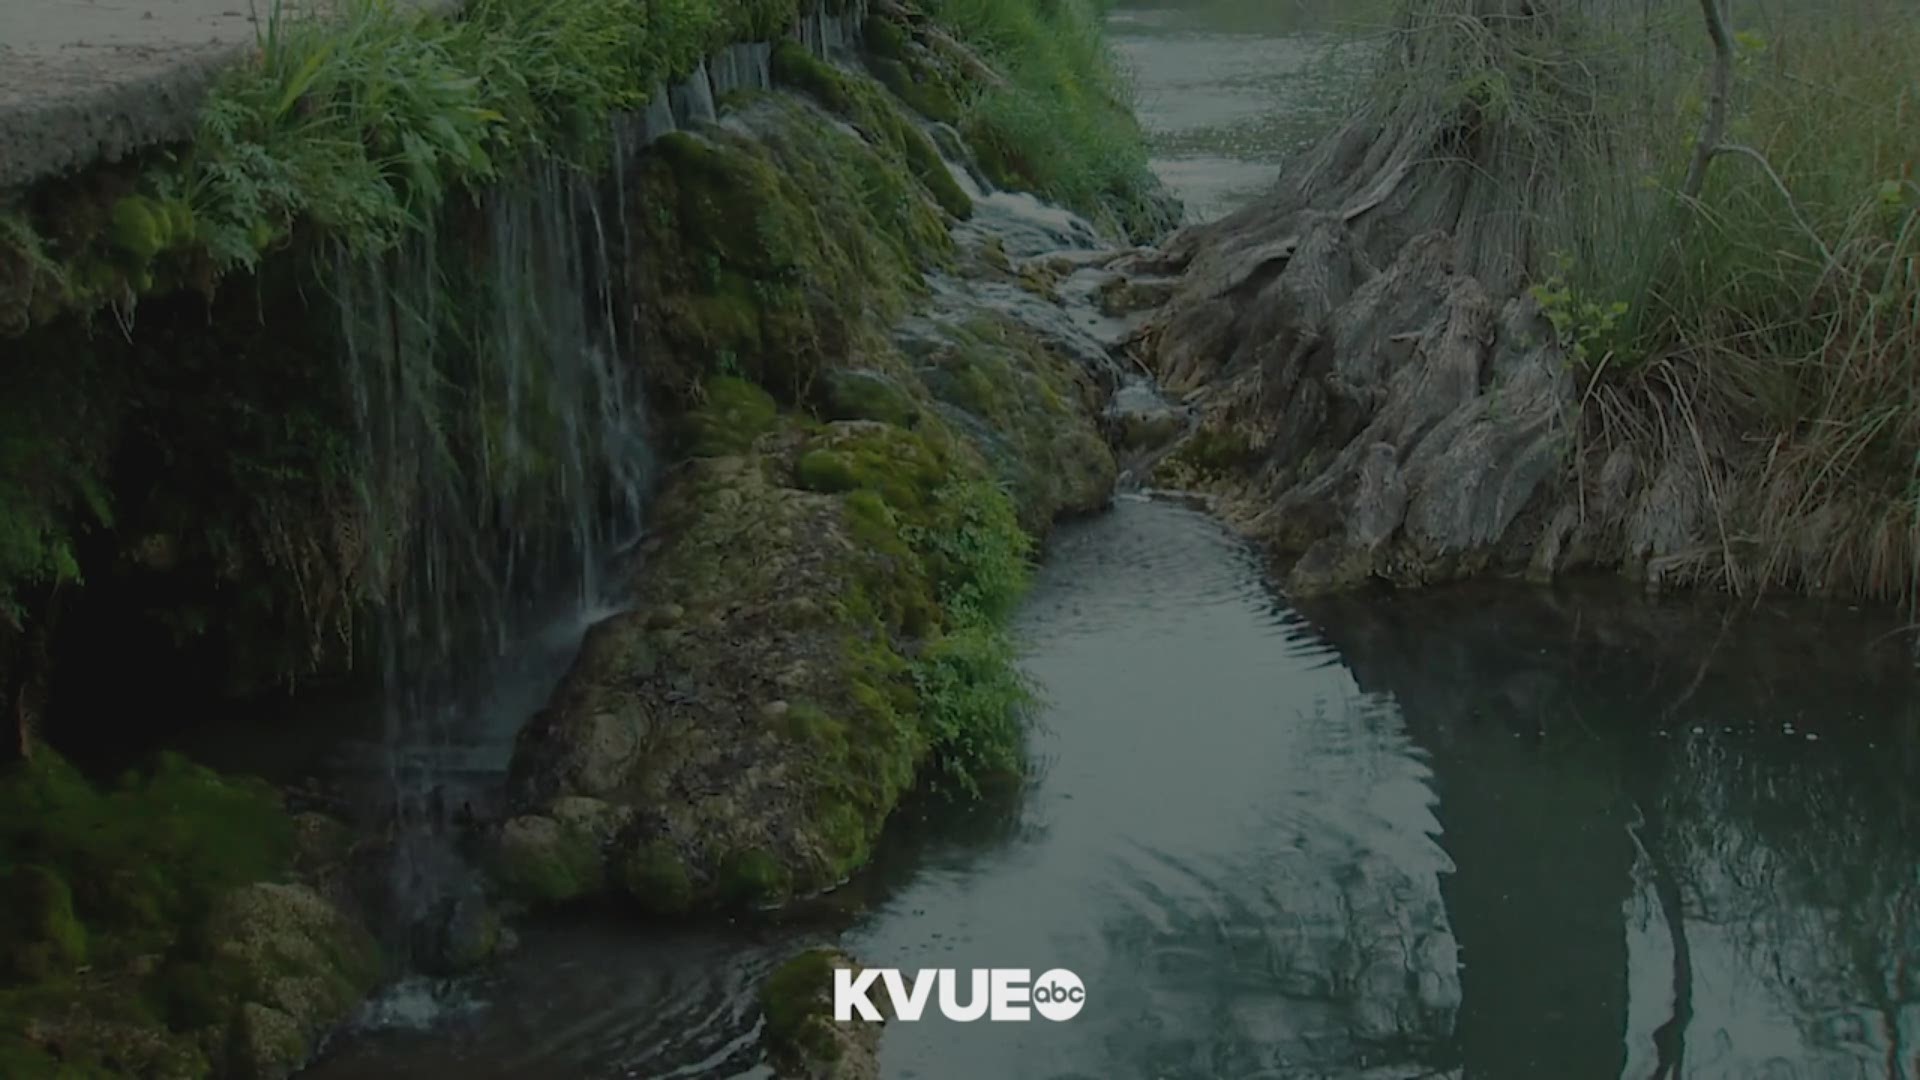 Take a moment to listen to the soothing sounds of waterfalls and see the beautiful creek.